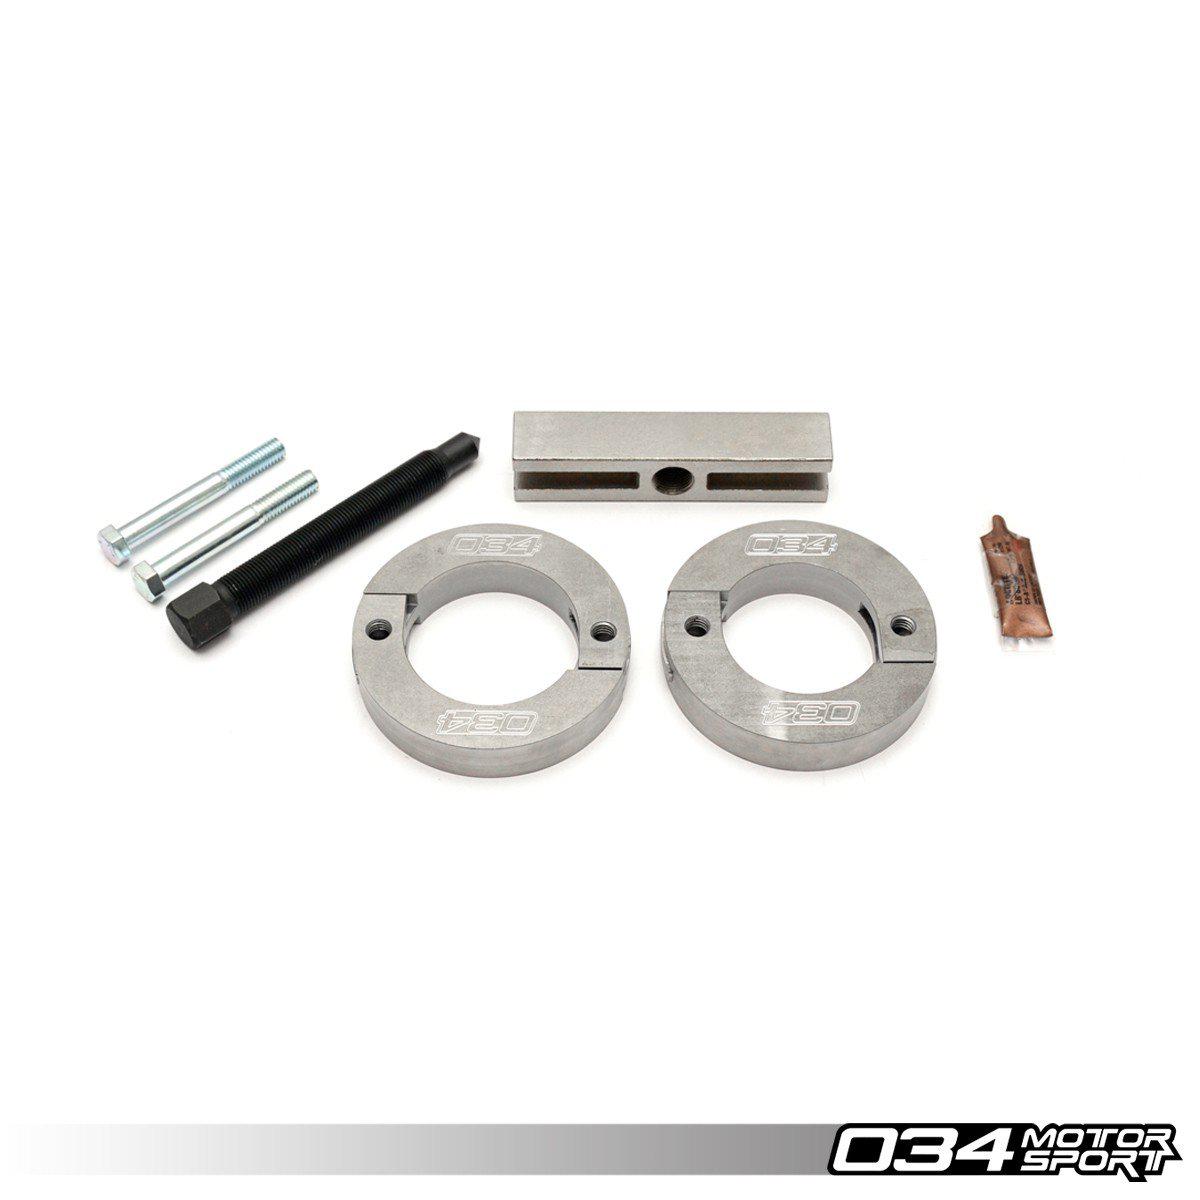 034Motorsport 3.0 TFSI Supercharger Pulley Removal Tool, B8/B8.5 Audi S4/S5/Q5/SQ5 & C7/C7.5 Audi A6/A7-A Little Tuning Co